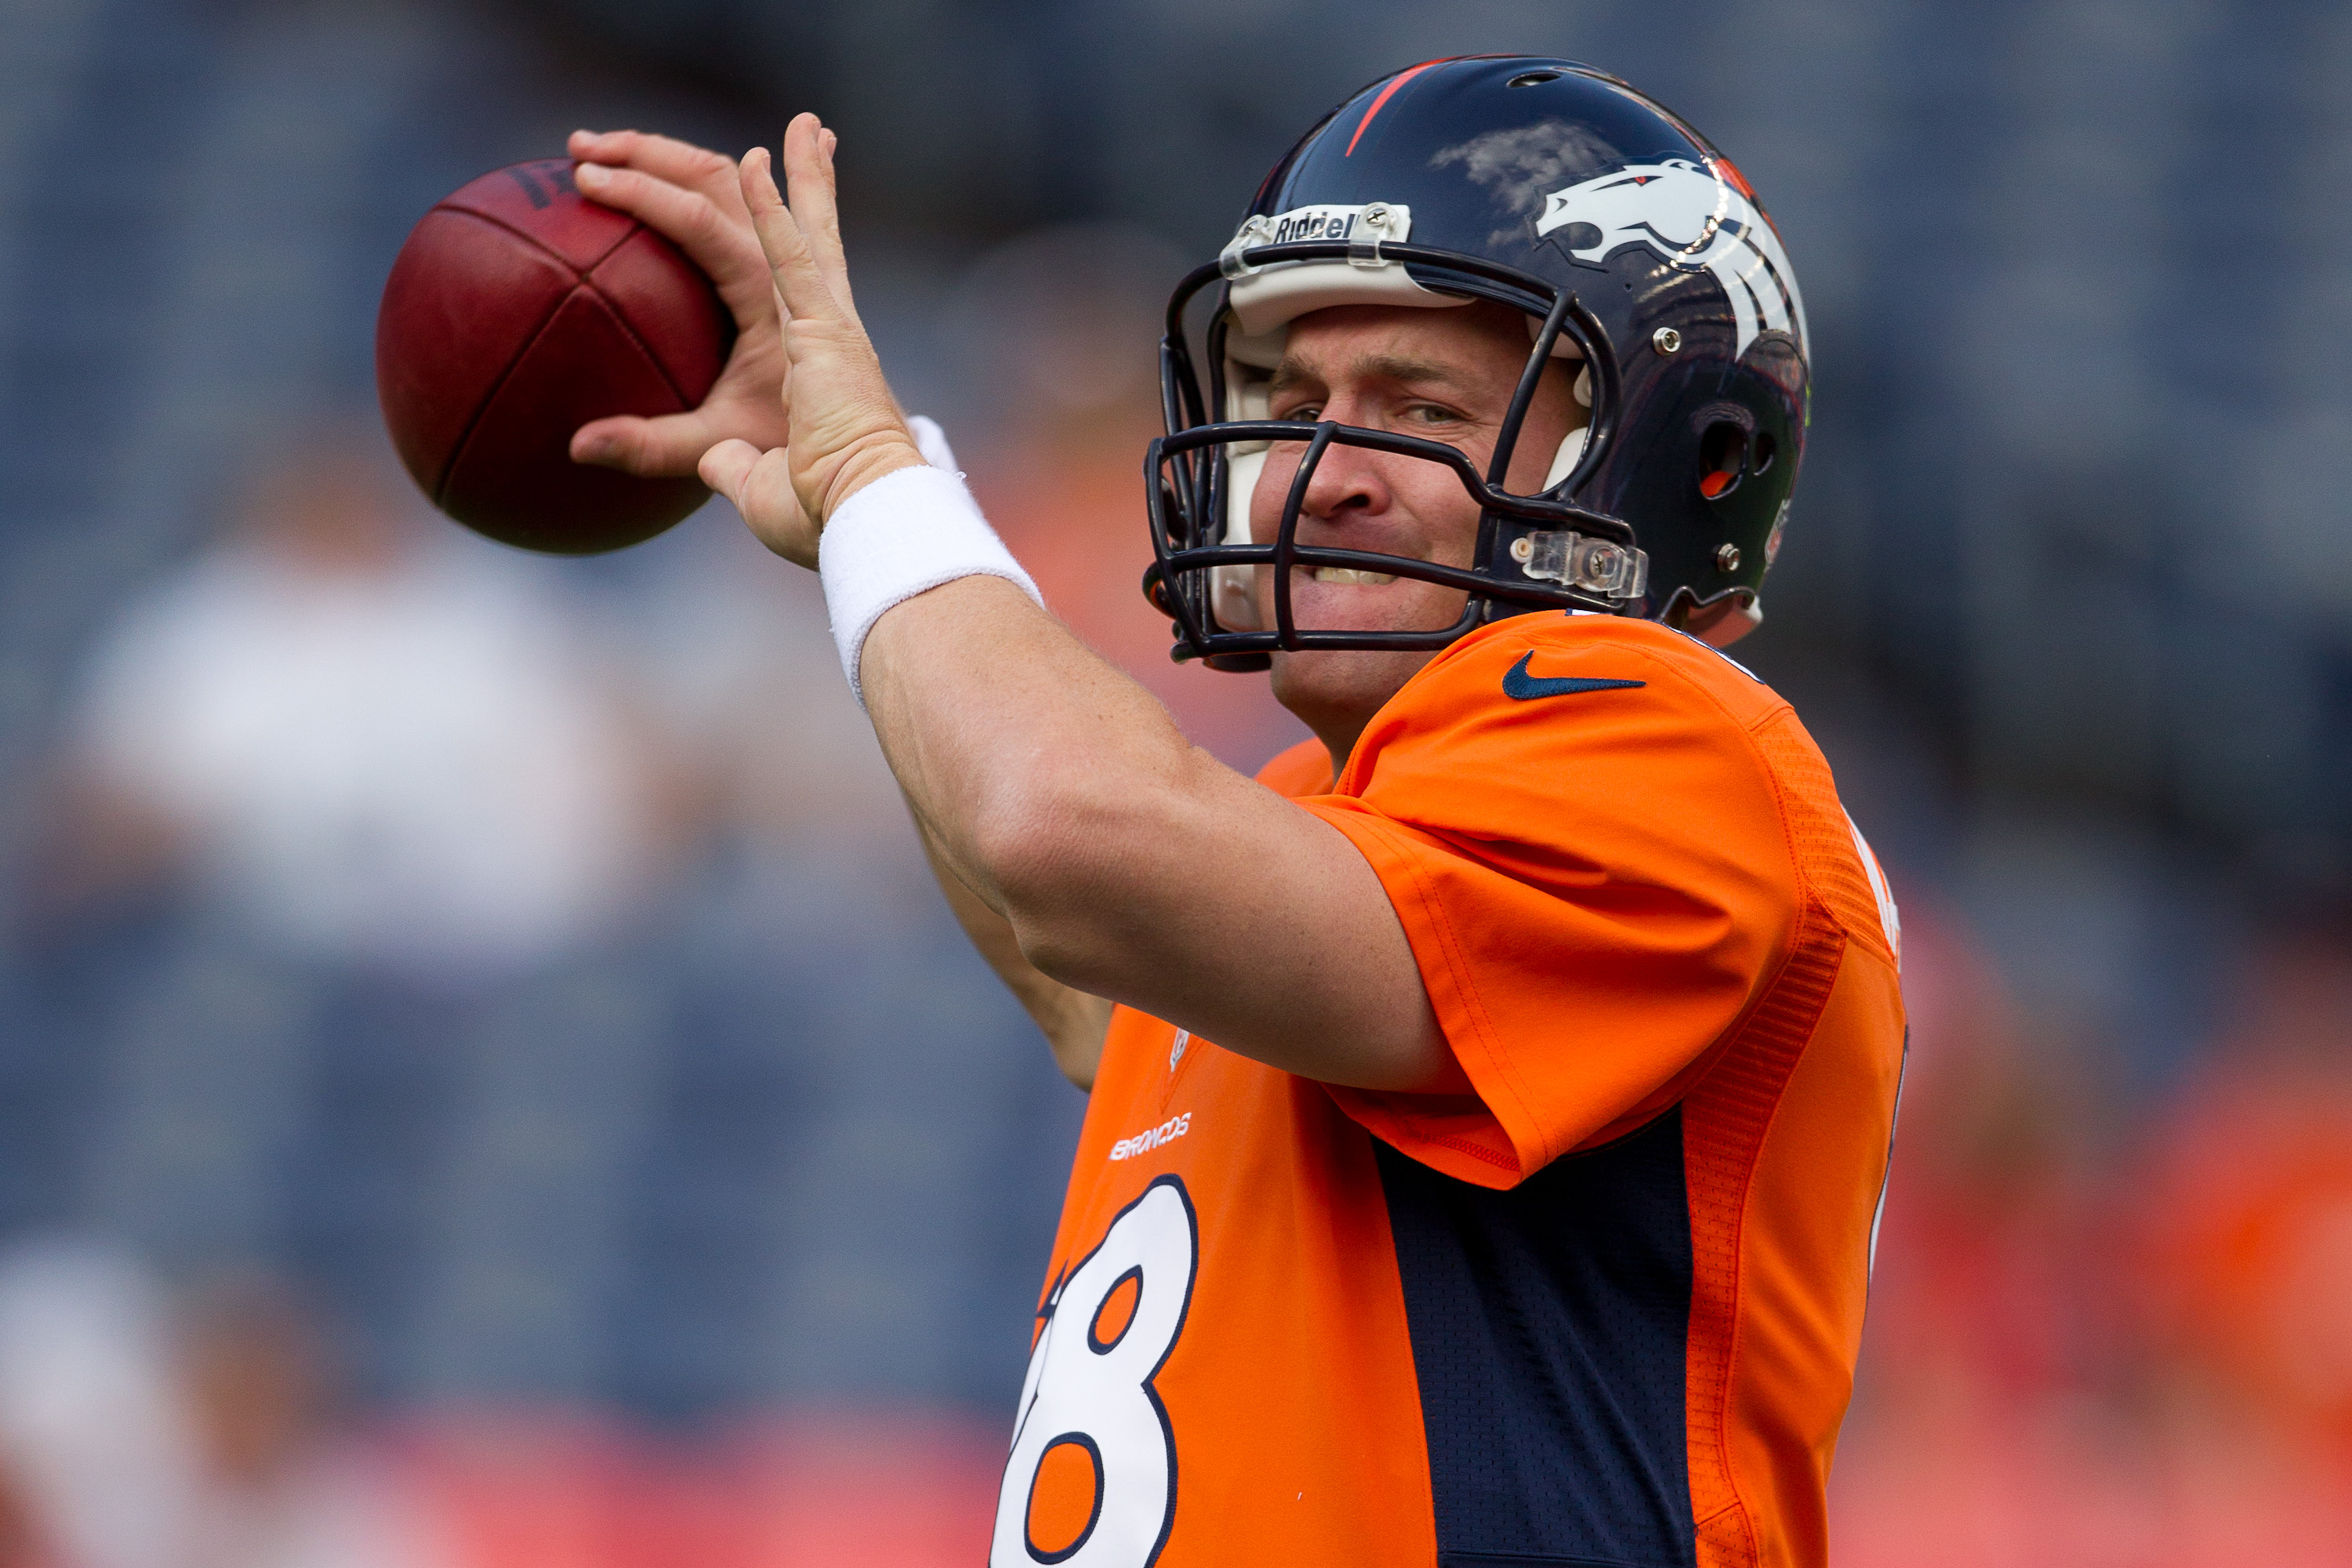 Peyton Manning finally returns to the field after 20-month hiatus